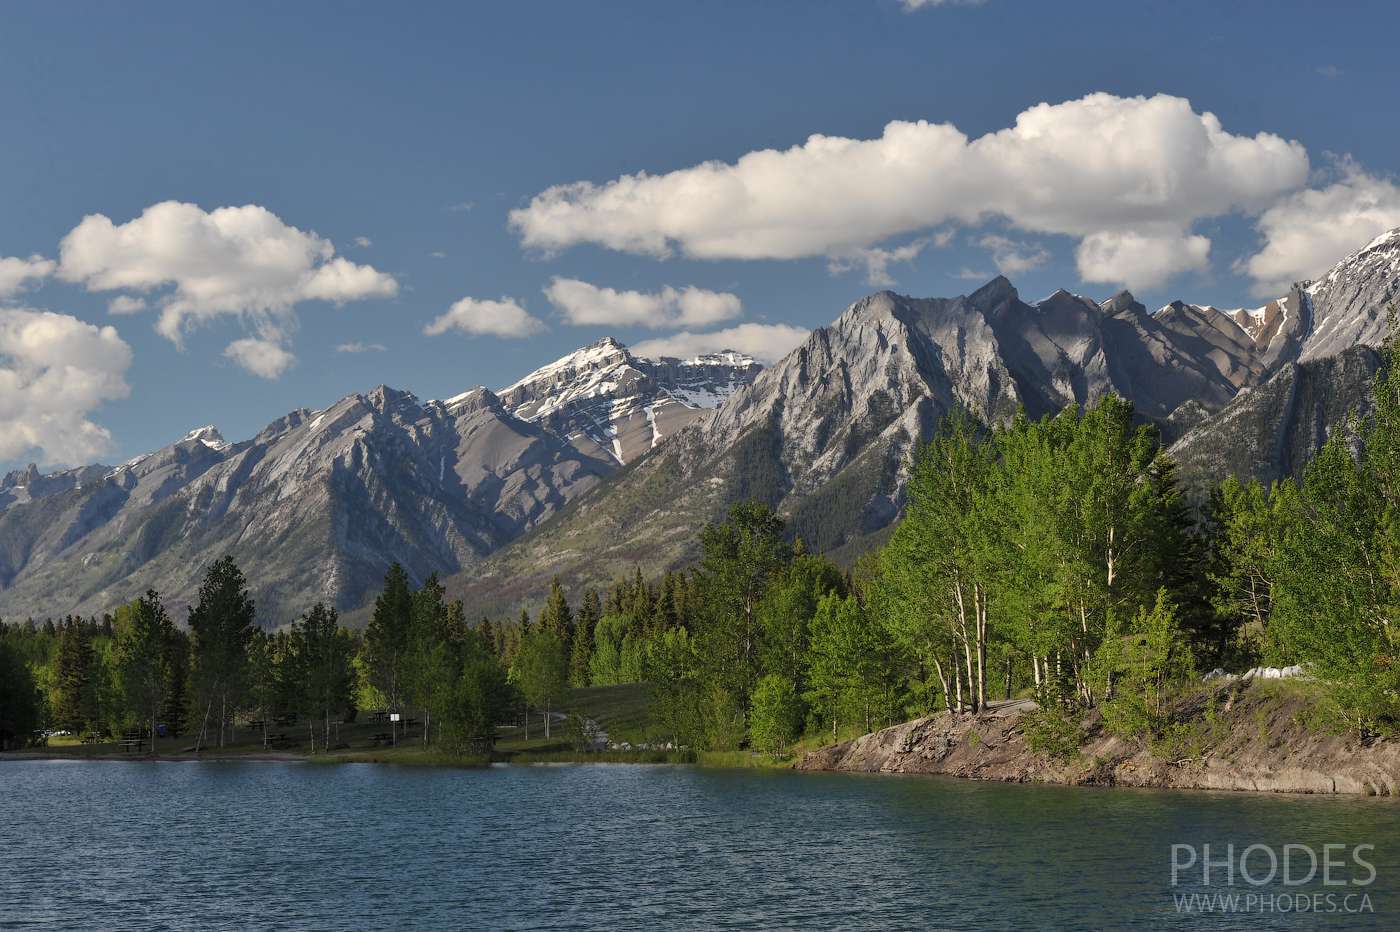 Querry Lake Park in Canmore